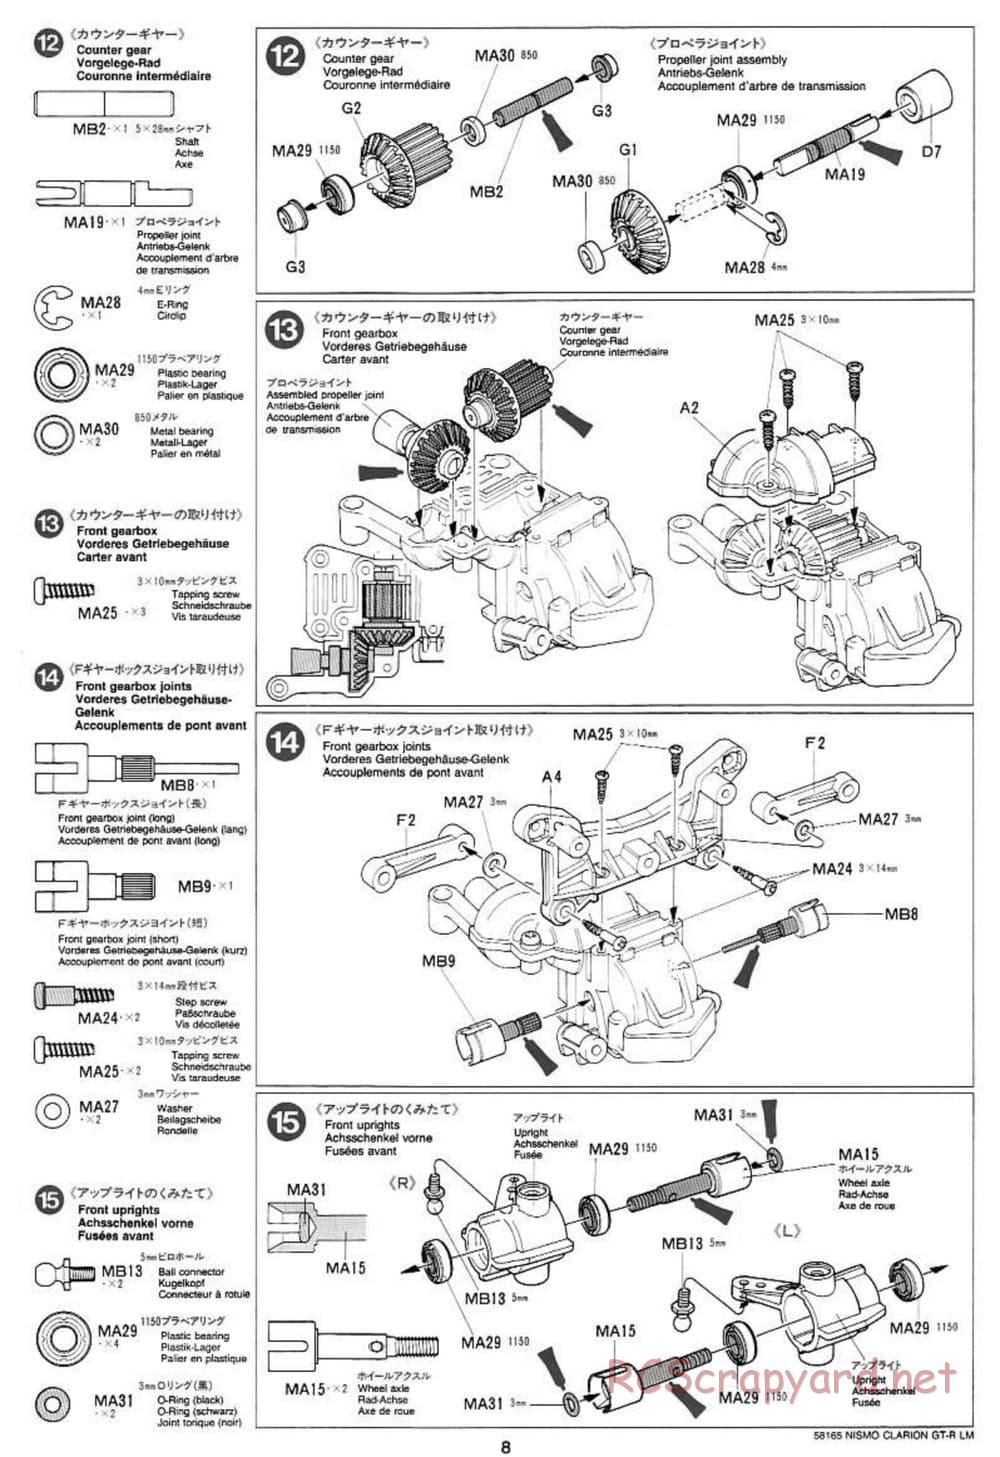 Tamiya - Nismo Clarion GT-R LM - TA-02W Chassis - Manual - Page 8